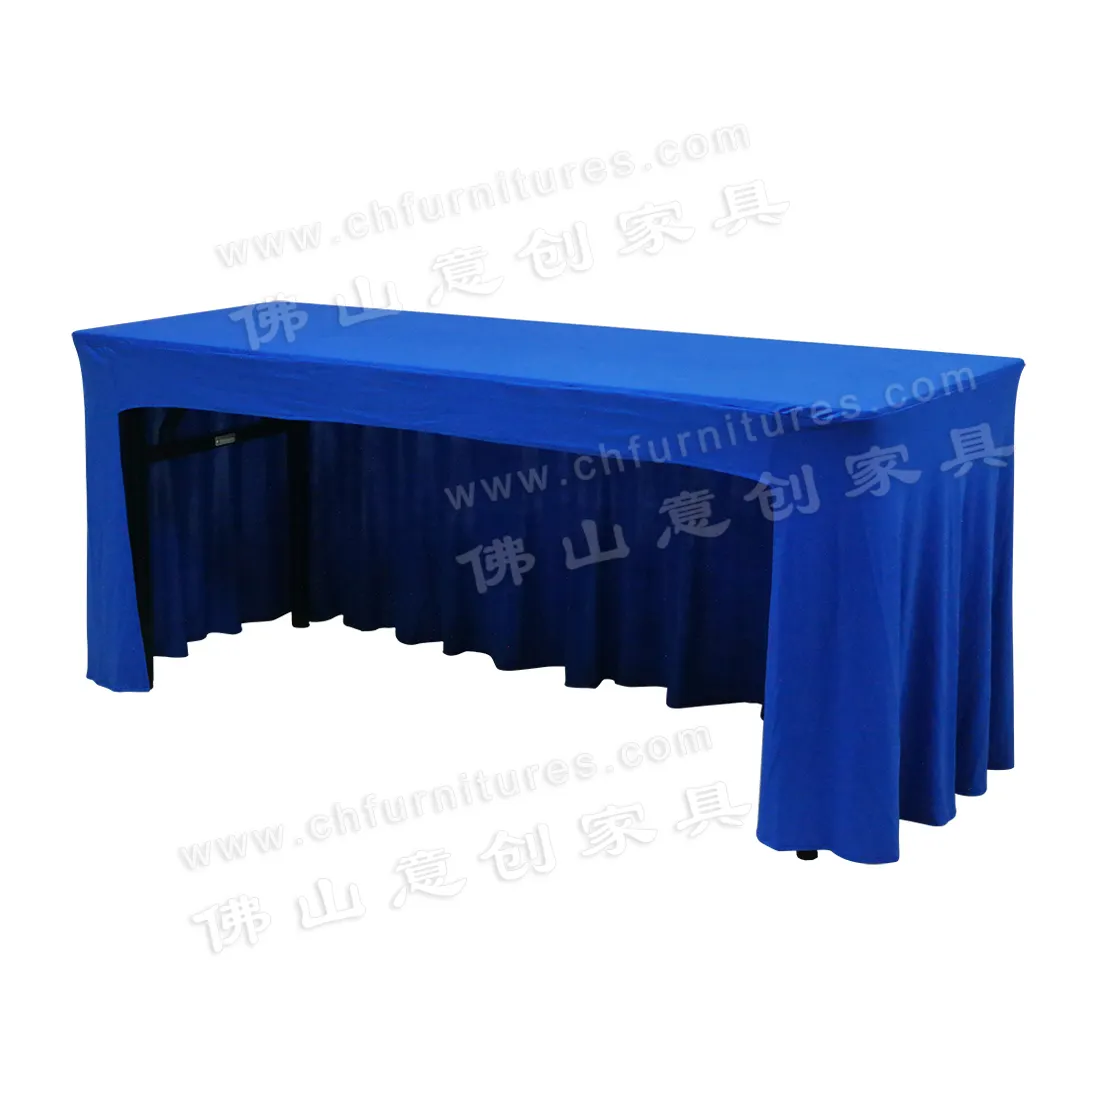 Customized Conference Room Office Desk Exhibition Activities Rectangular Spandex Flexible Elastics Table Skirt Table Cover